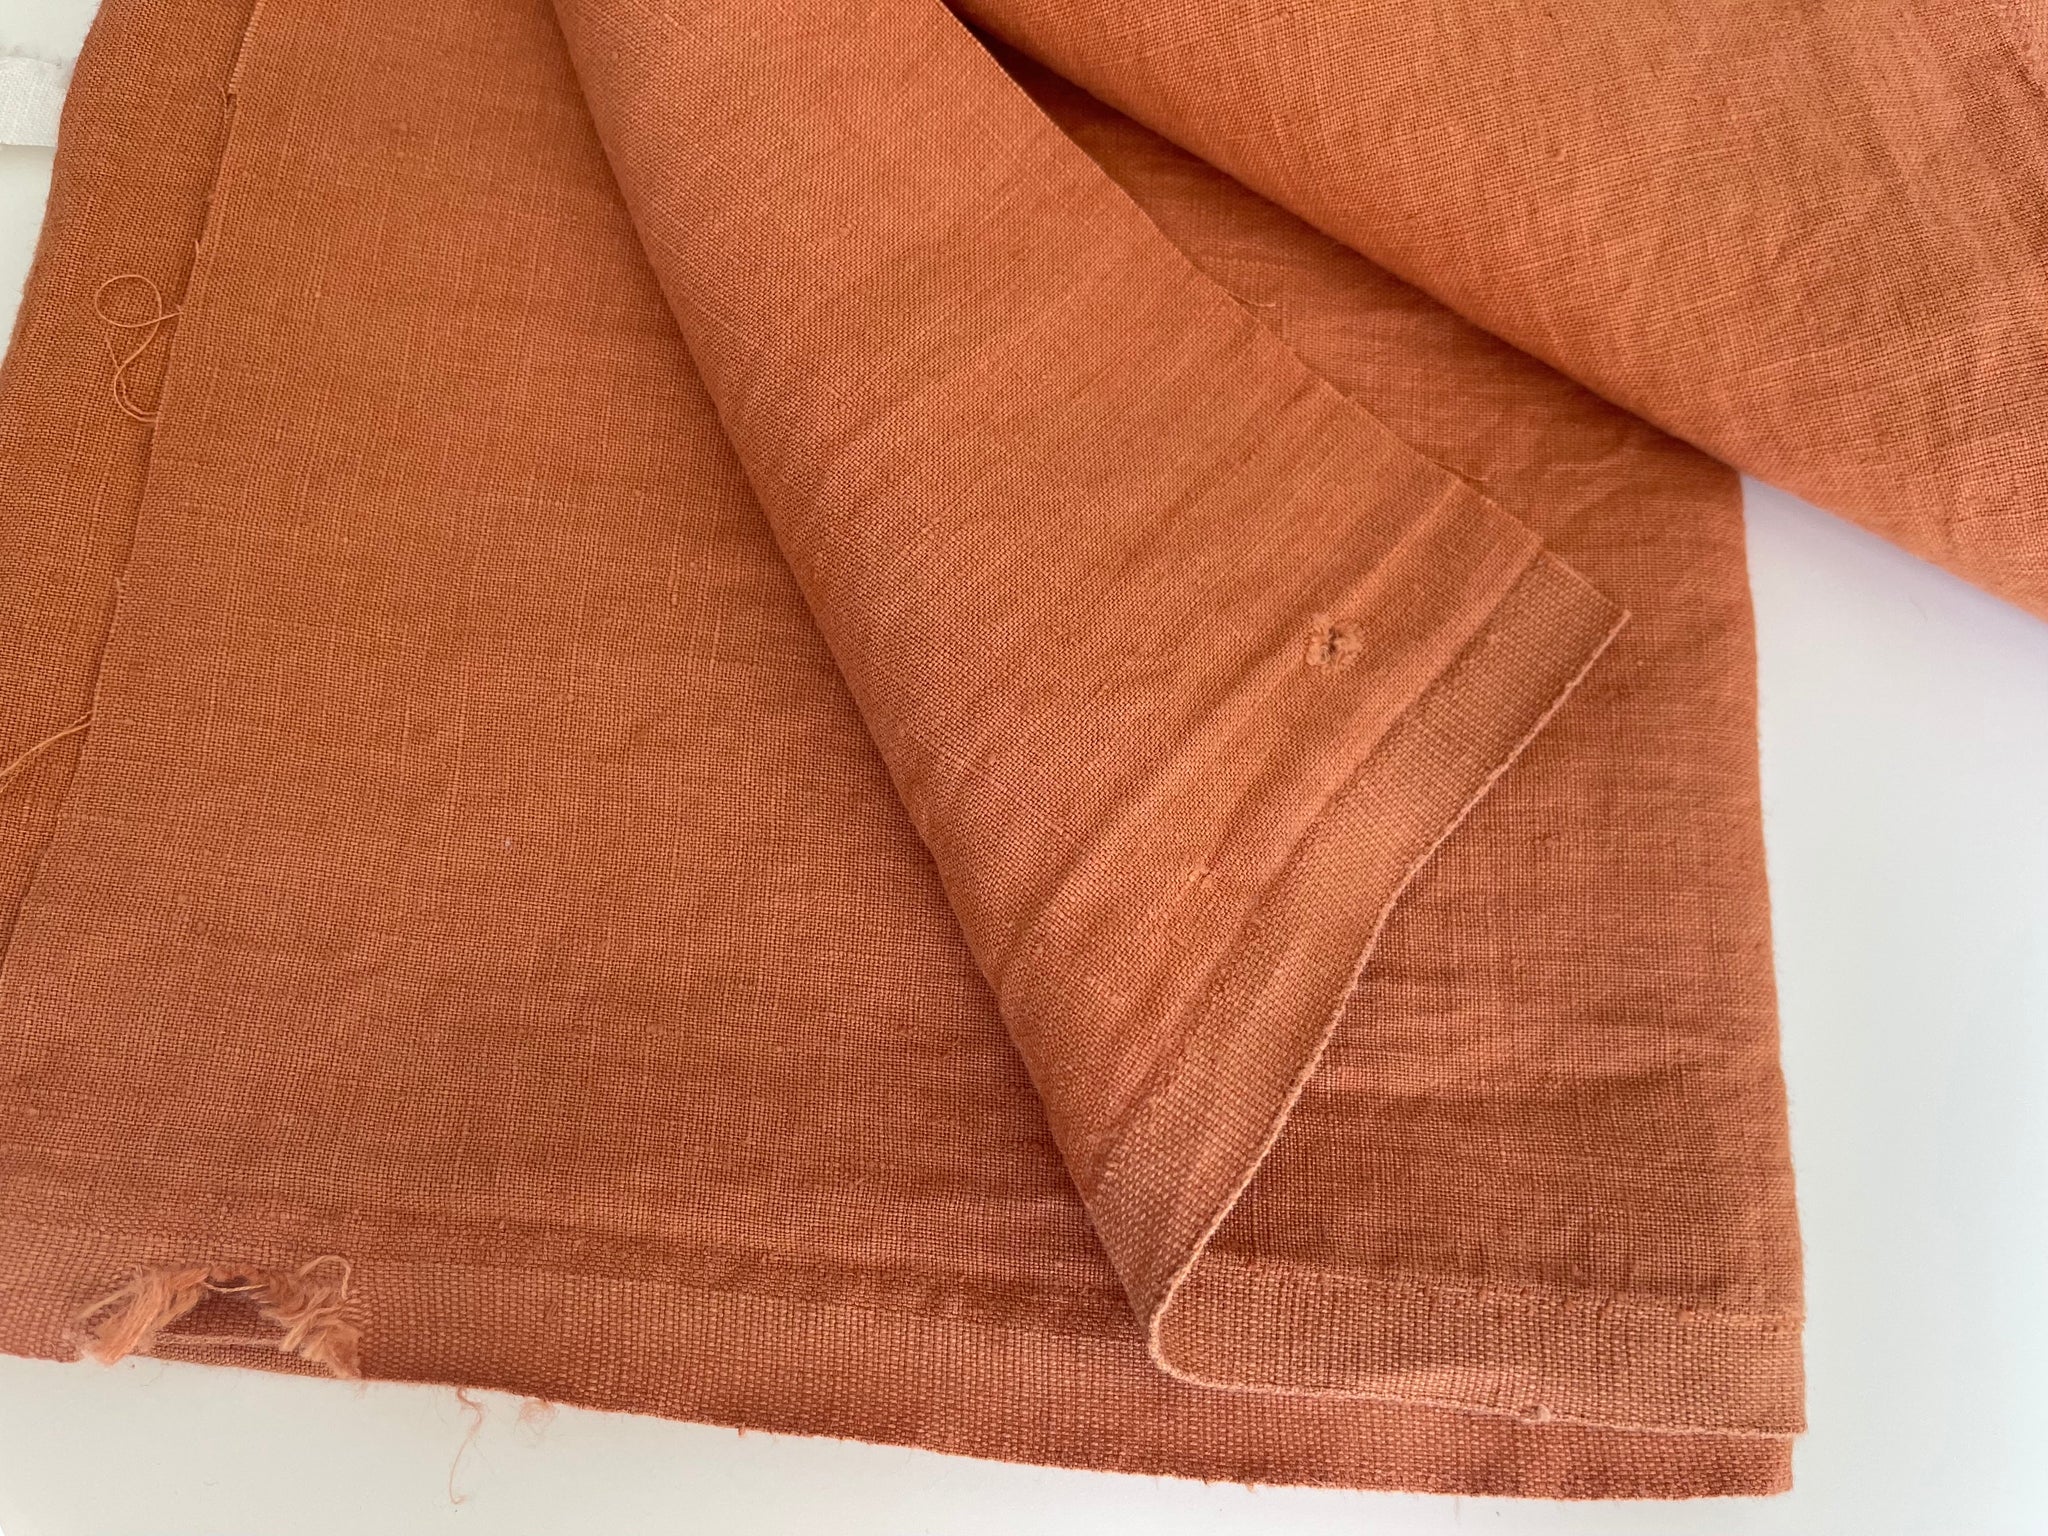 Linen Fabric Remnants - Terracotta - small holes along selvage